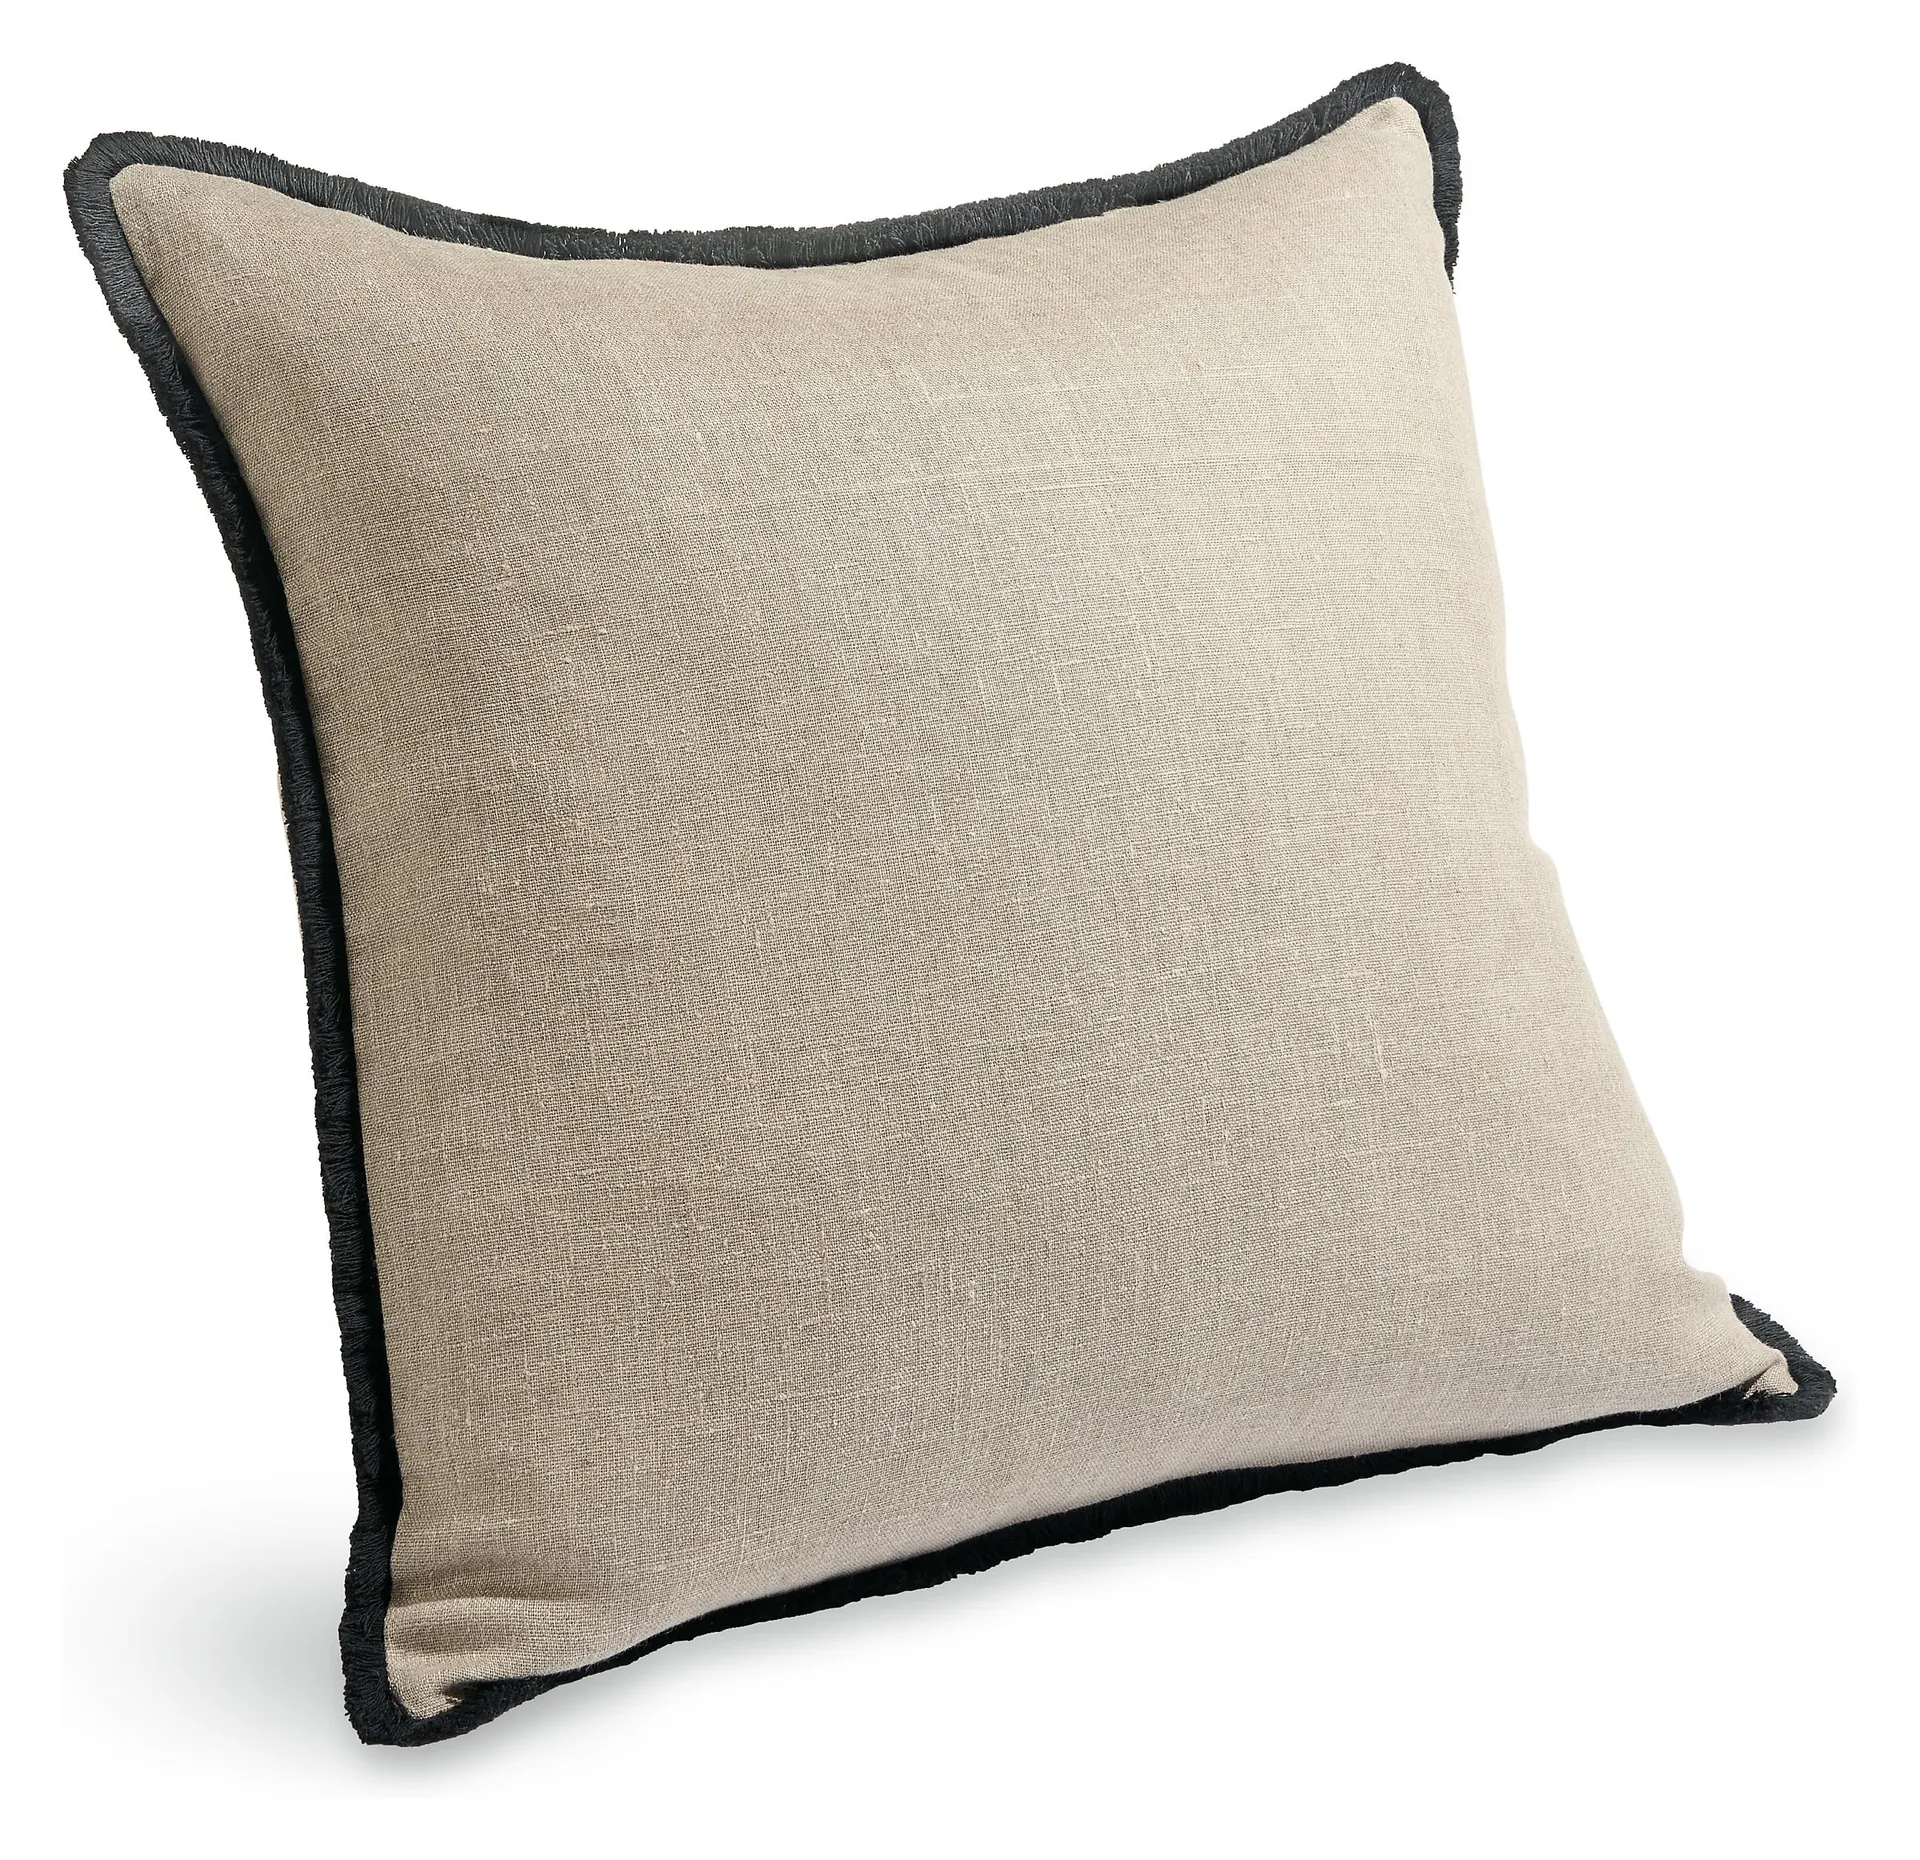 Marling 20w 20h Throw Pillow in Natural with Black Fringe